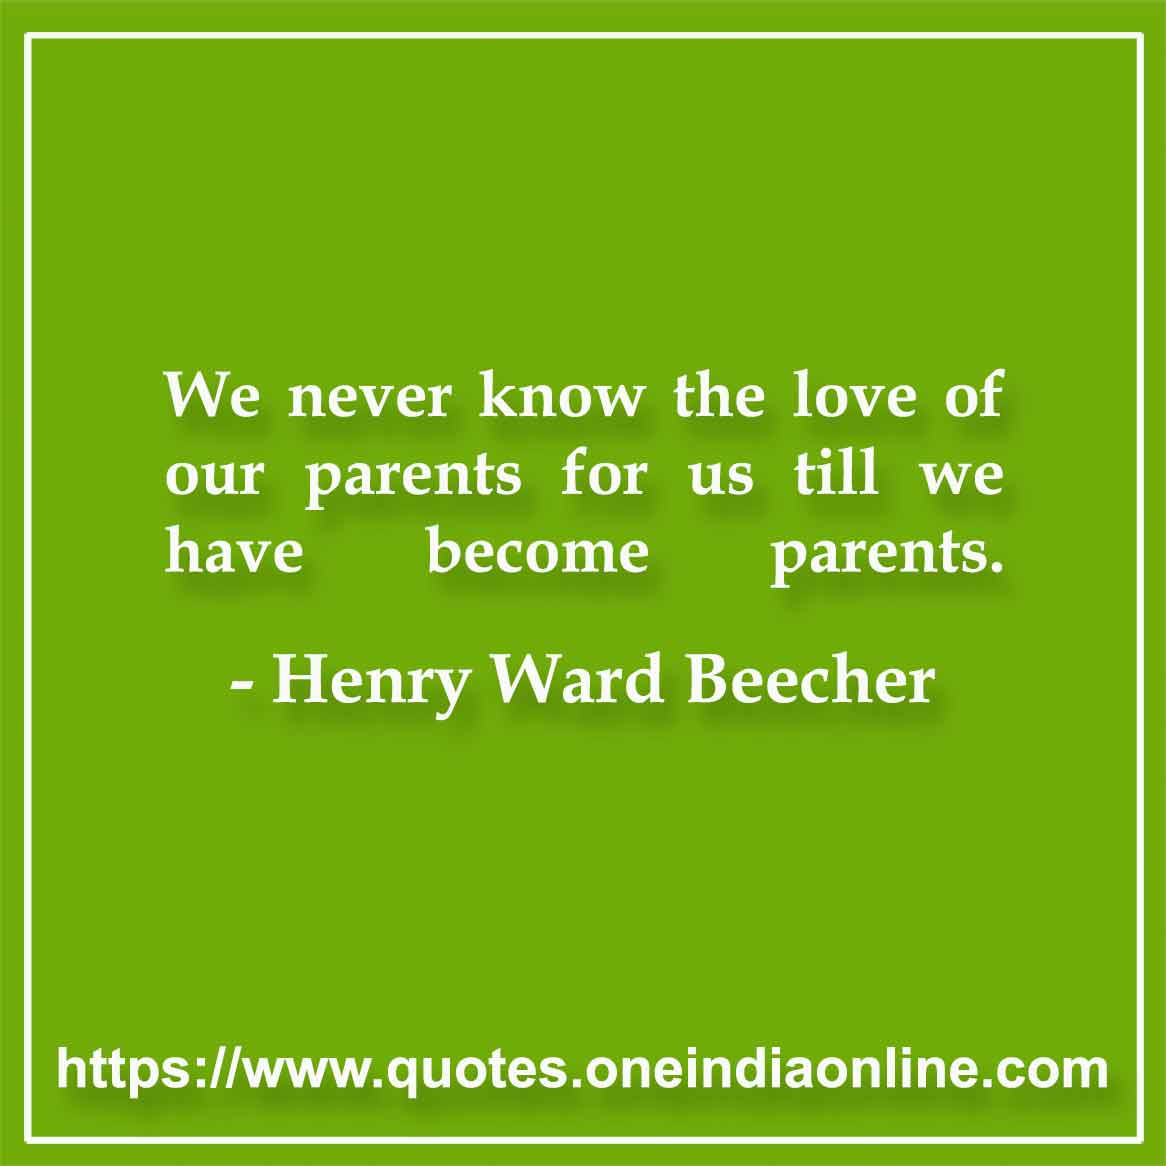 We never know the love of our parents for us till we have become parents.

-  by Henry Ward Beecher